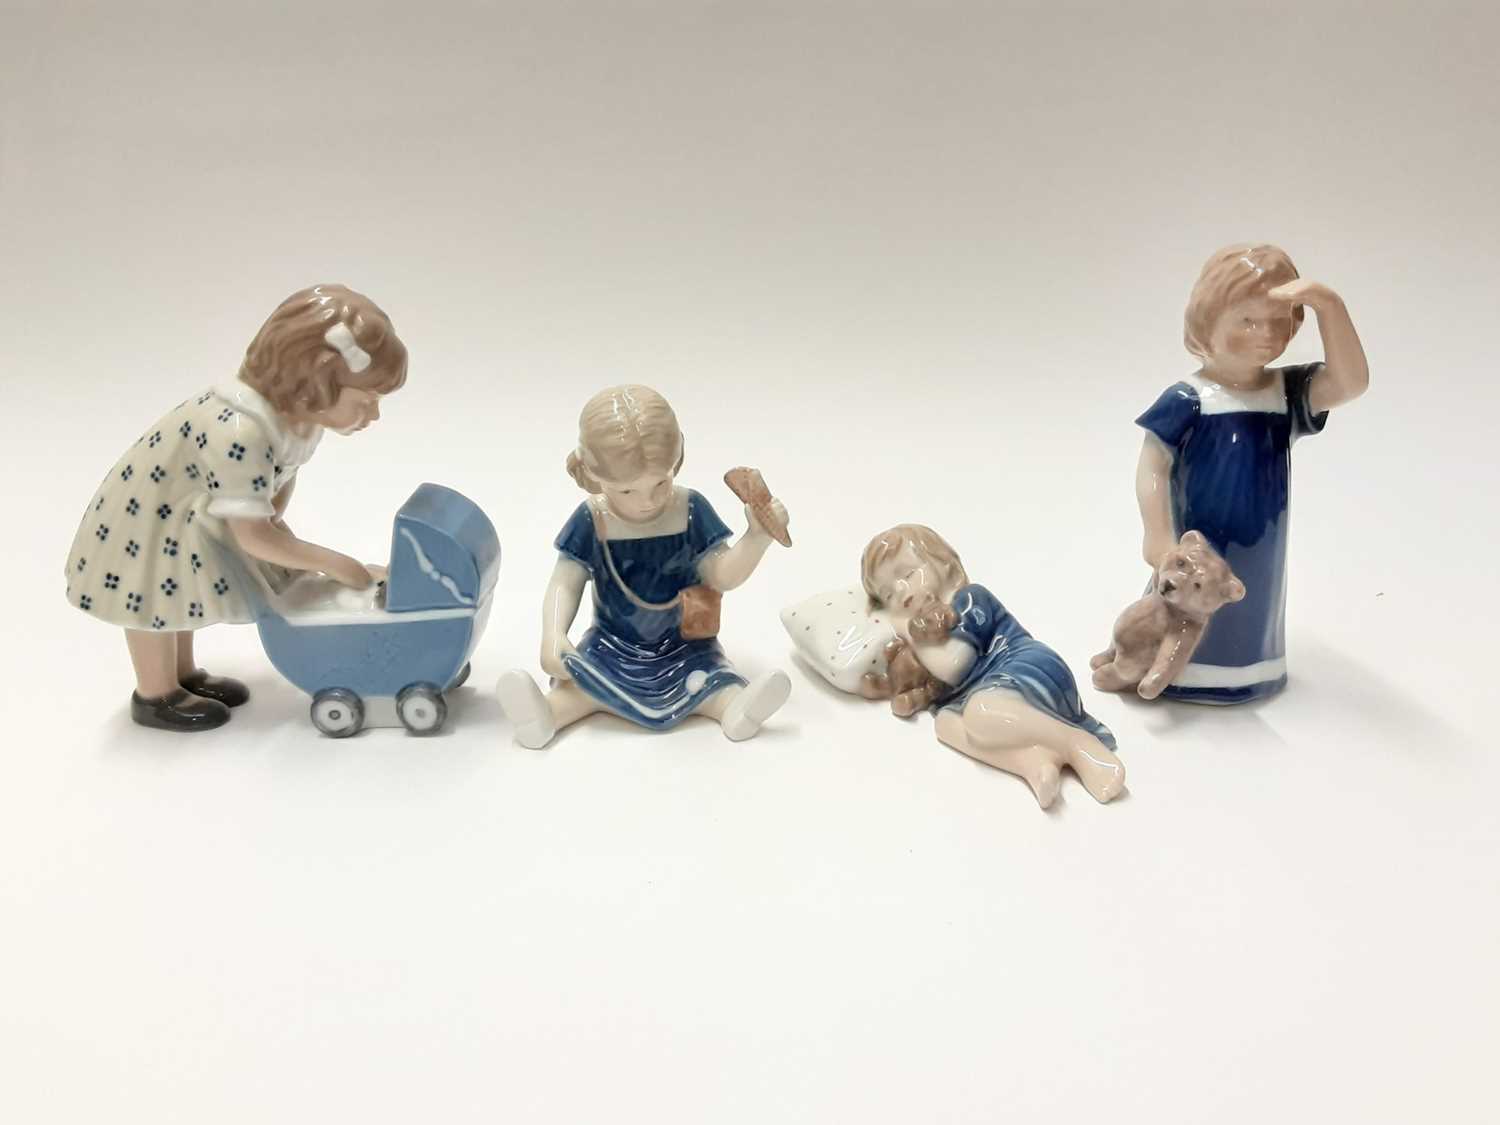 Lot 150 - Four Royal Copenhagen porcelain figures including girl with pram and girl with Teddy bear, model numbers 675, 673, 676 and 407